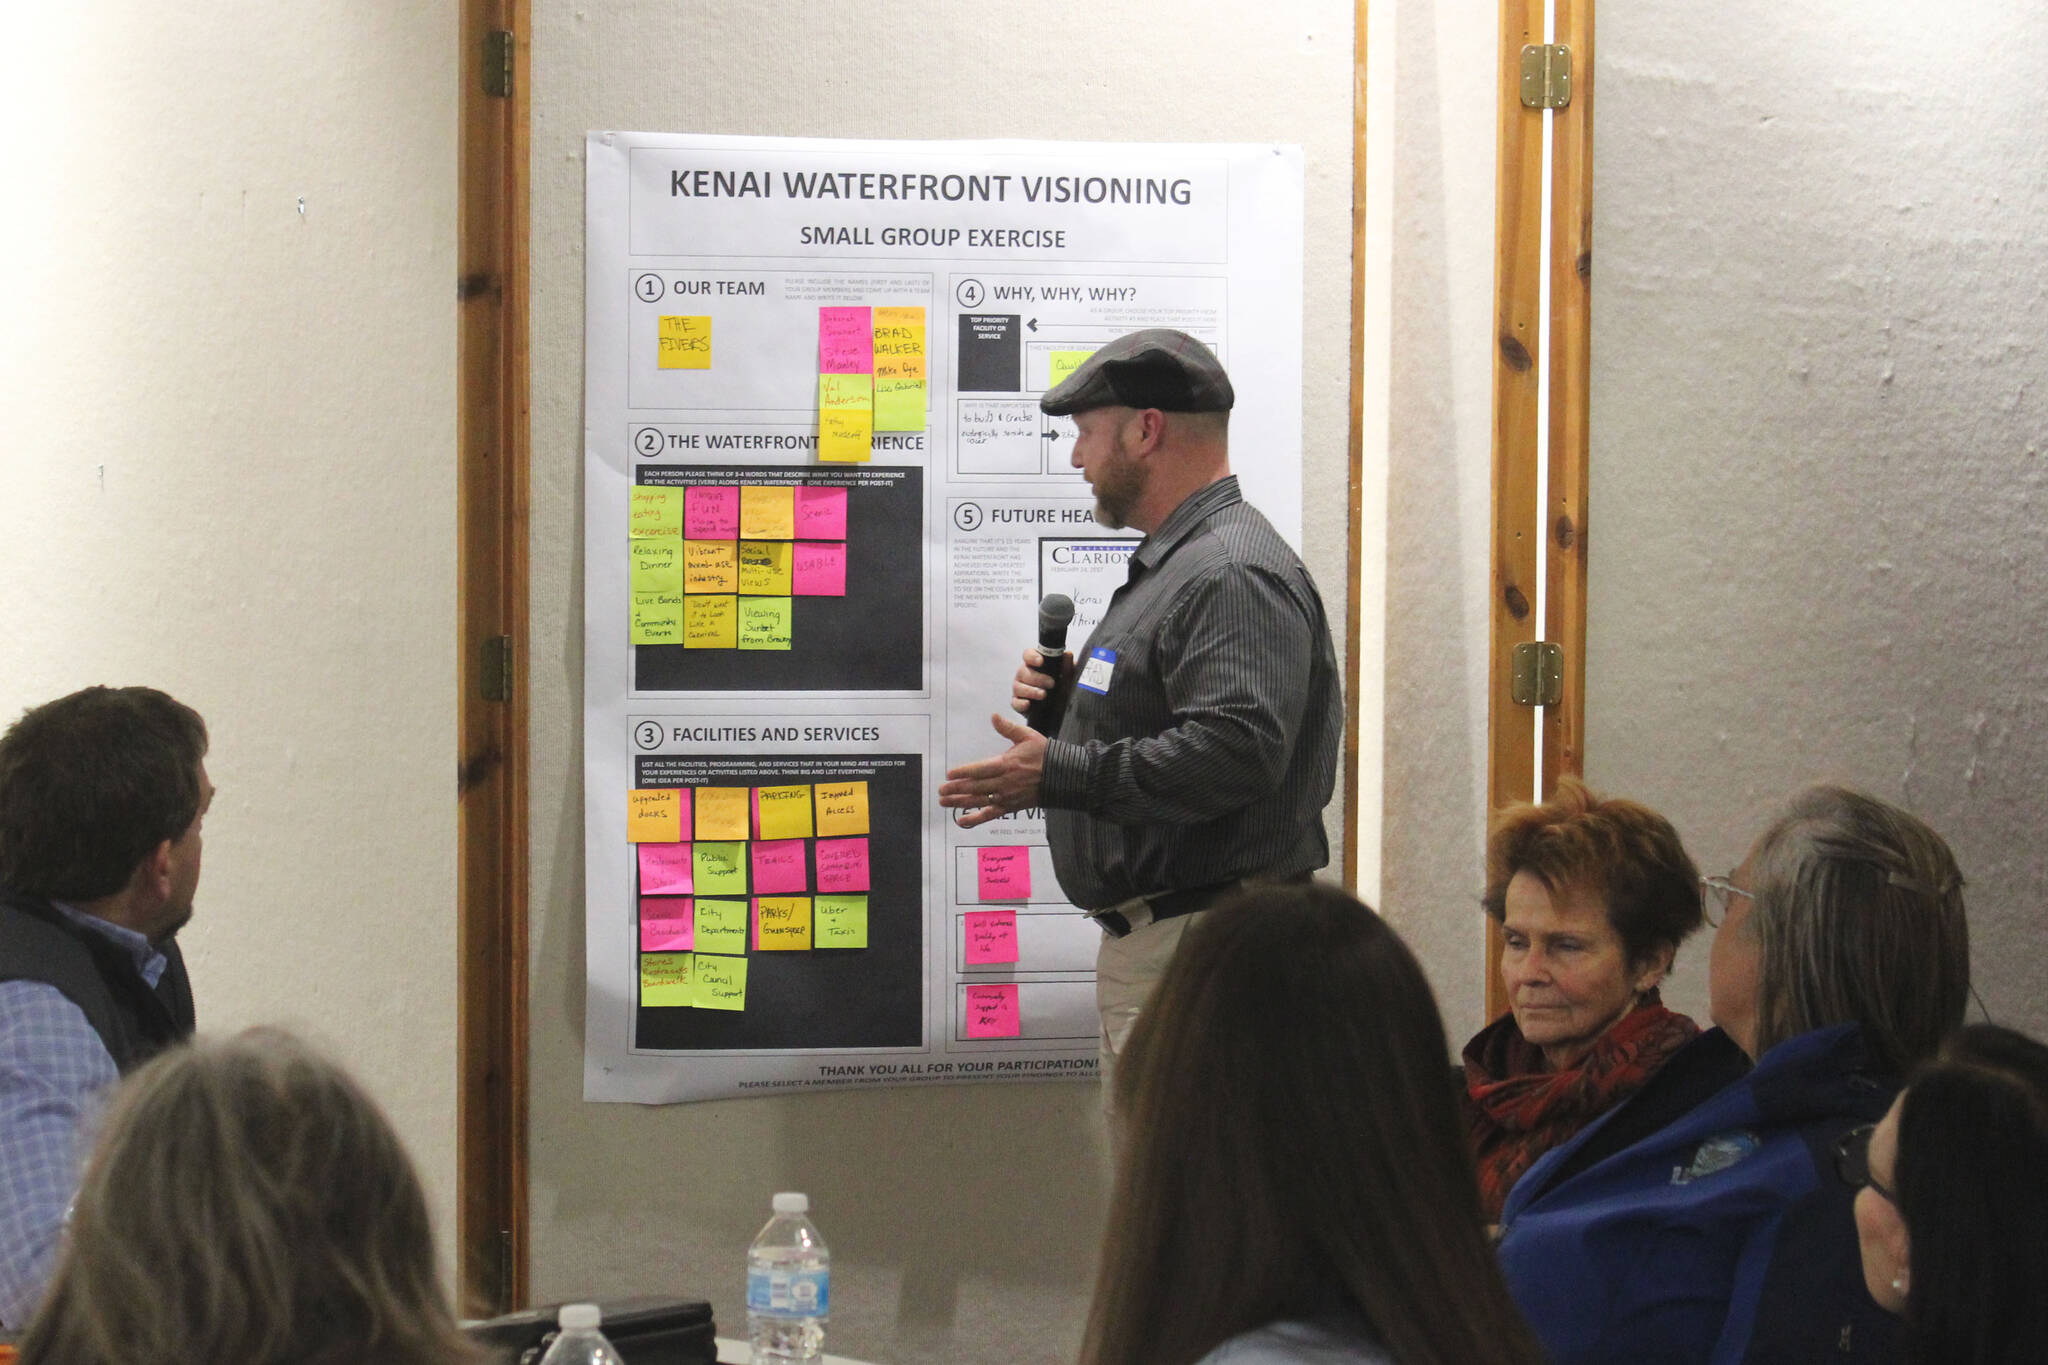 Kenai Parks and Recreation Director Brad Walker speaks during a small group activity as part of a community vision session for the Kenai Waterfront Revitalization Project on Thursday, Feb. 24, 2022 in Kenai, Alaska. (Ashlyn O'Hara/Peninsula Clarion)